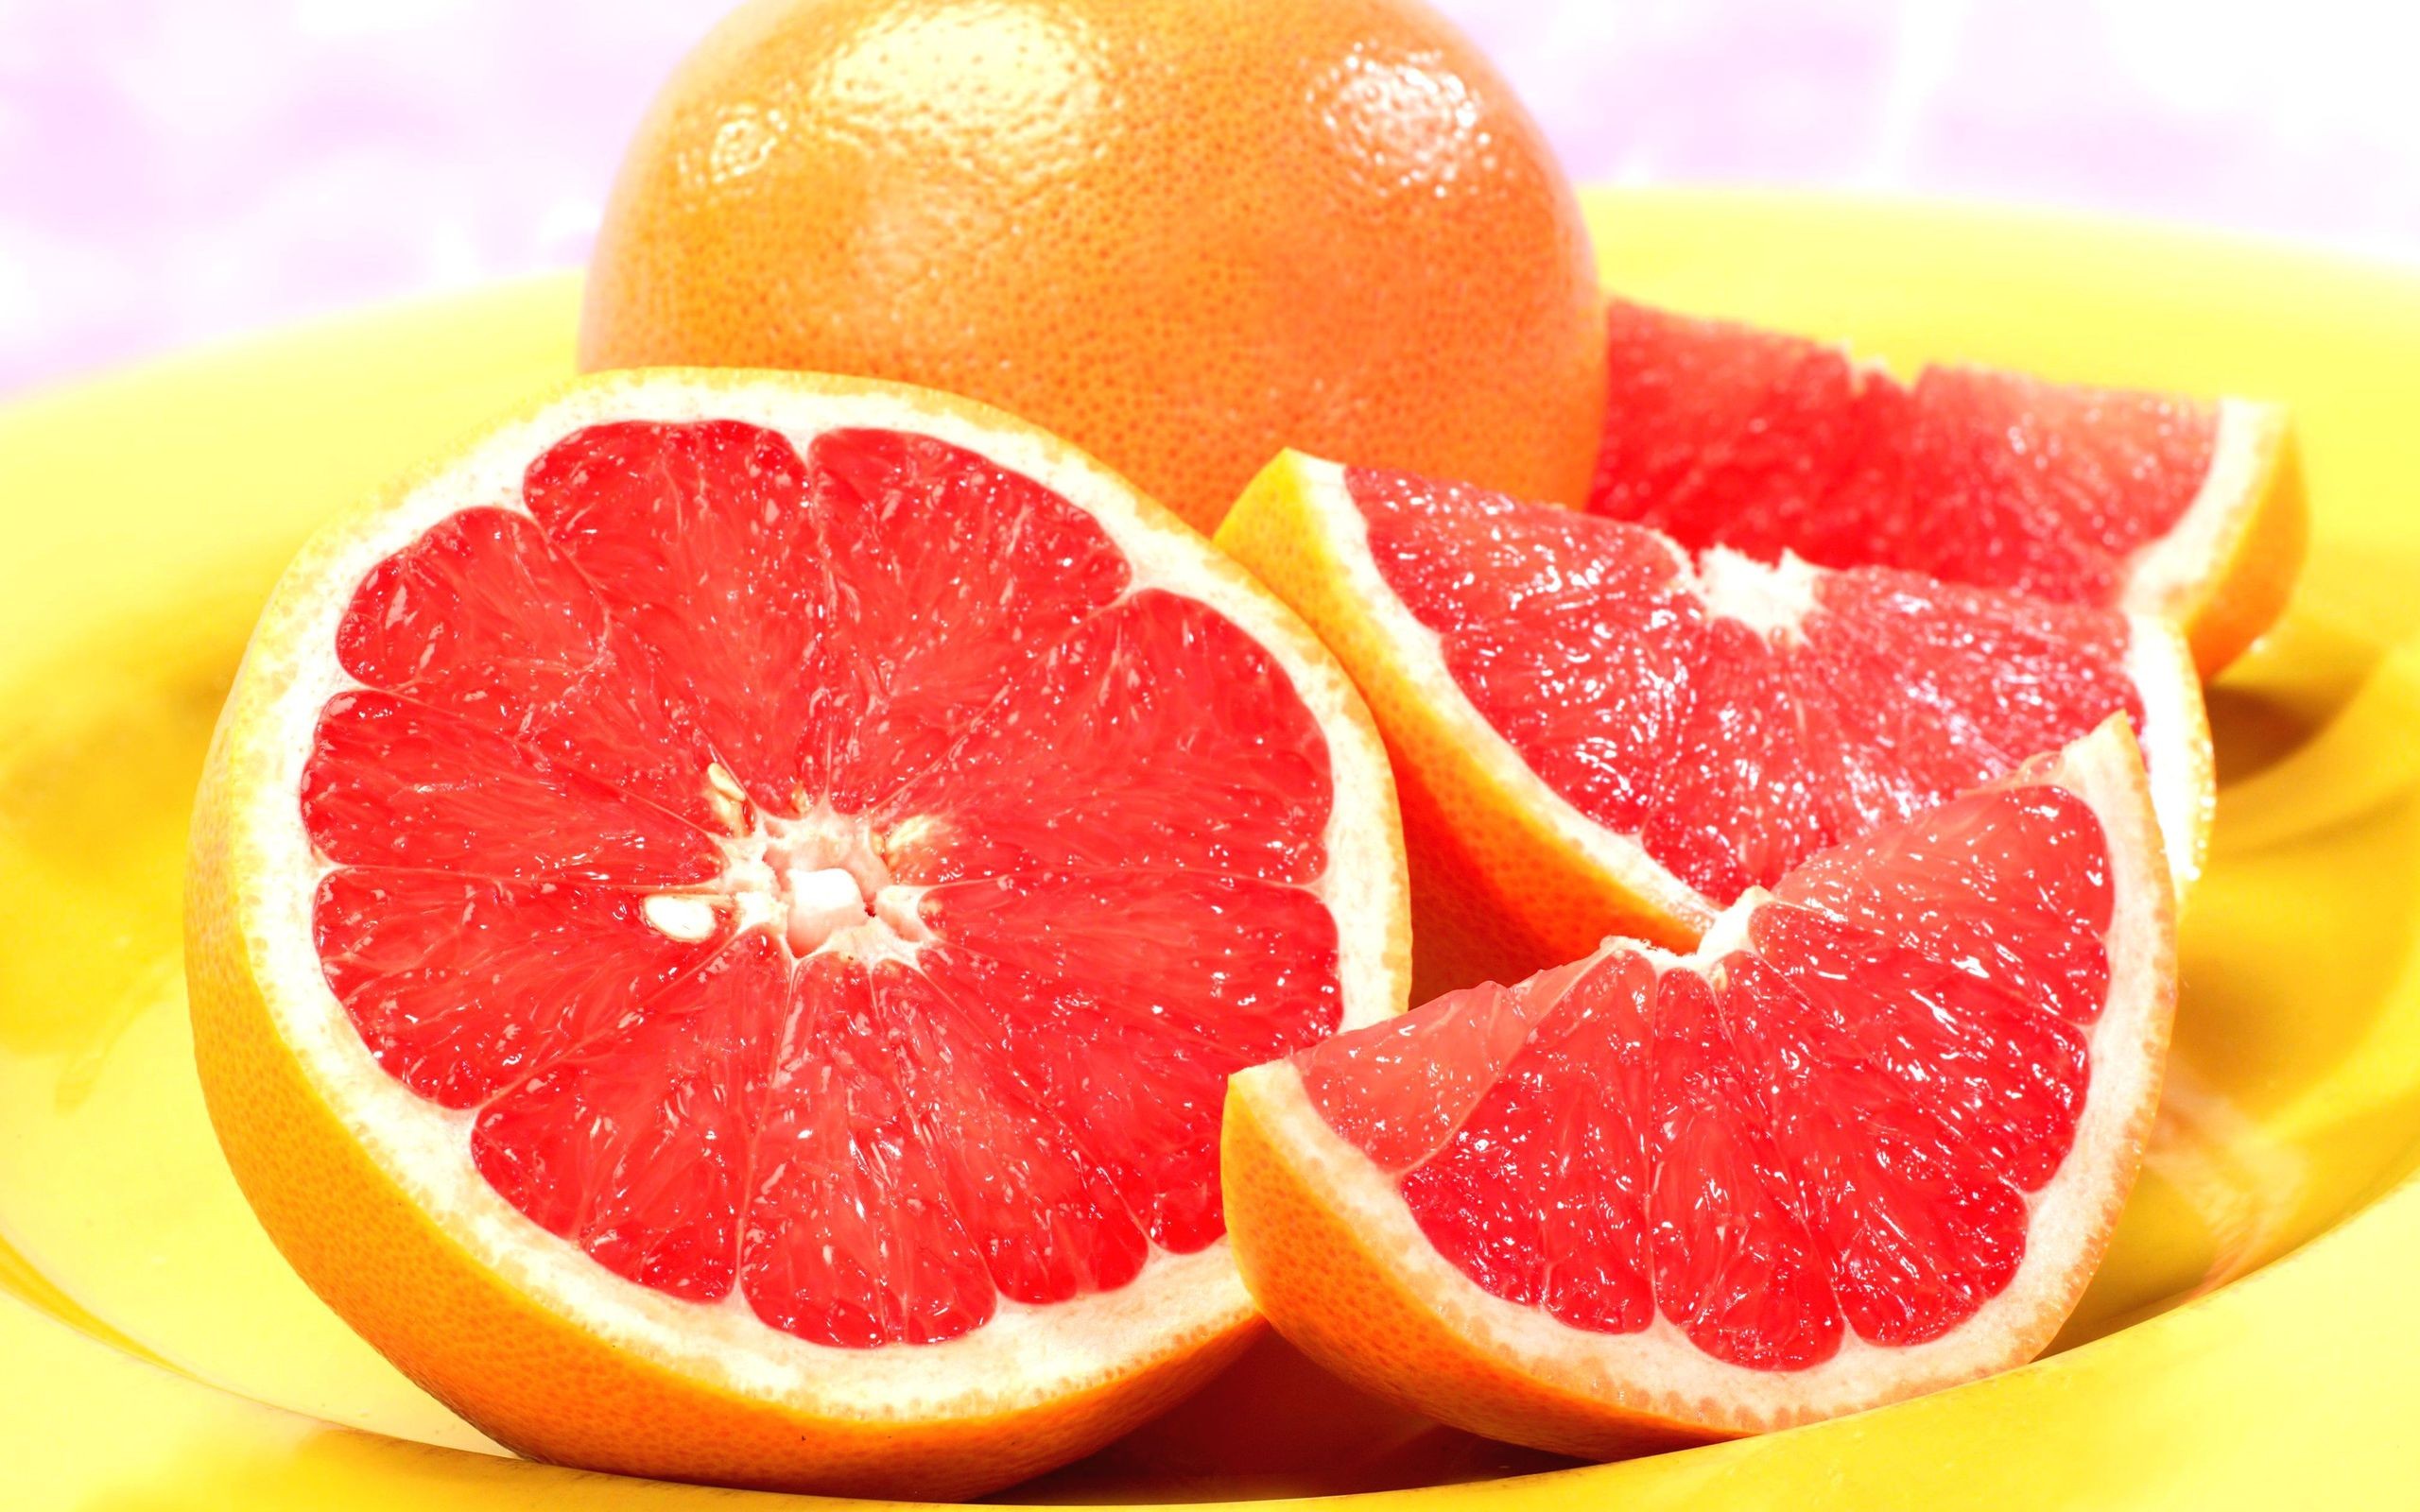 Grapefruit benefits for losing weight